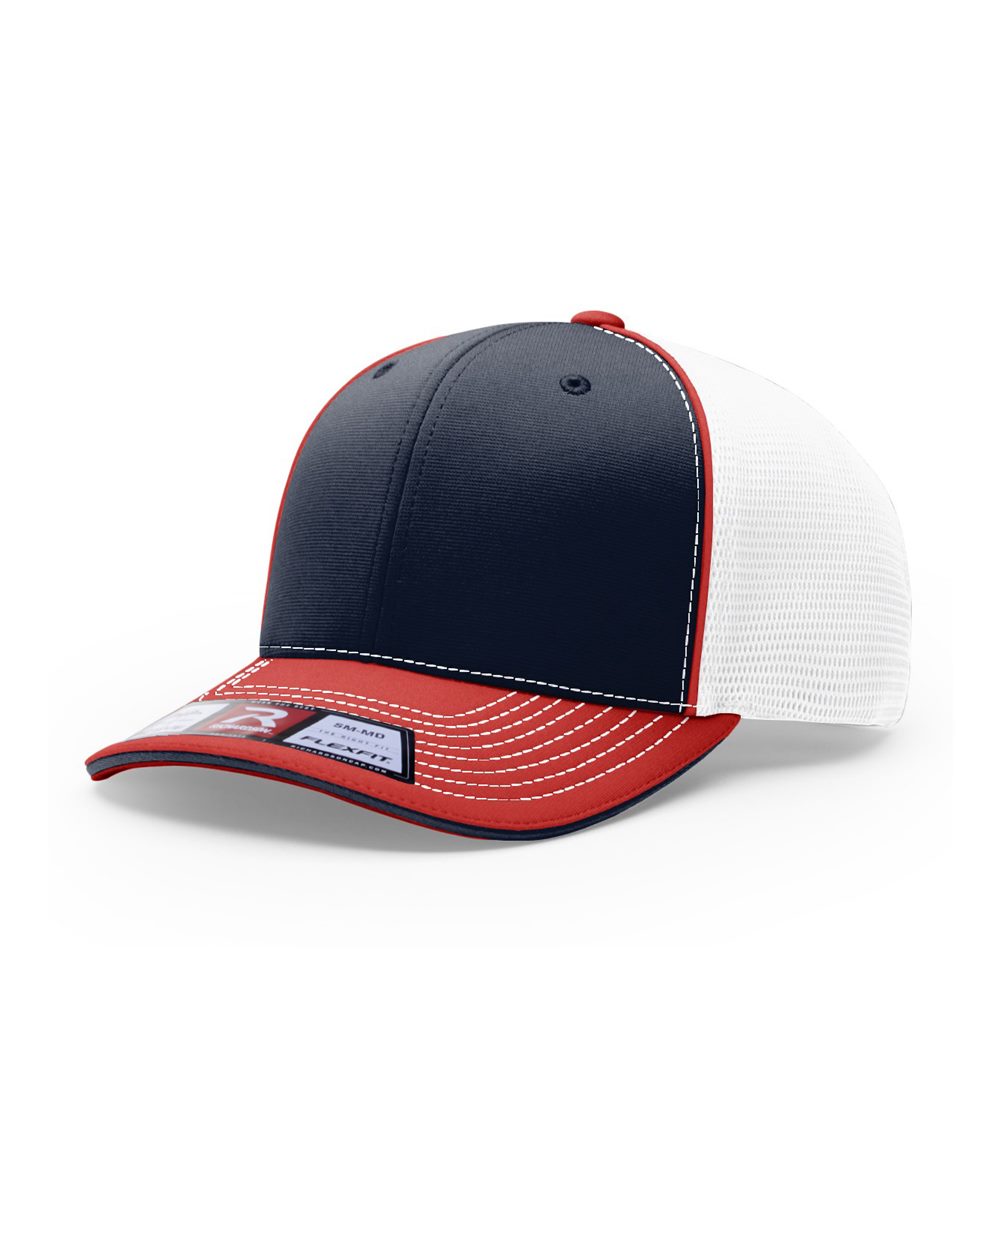 click to view Navy/ White/ Red Tri